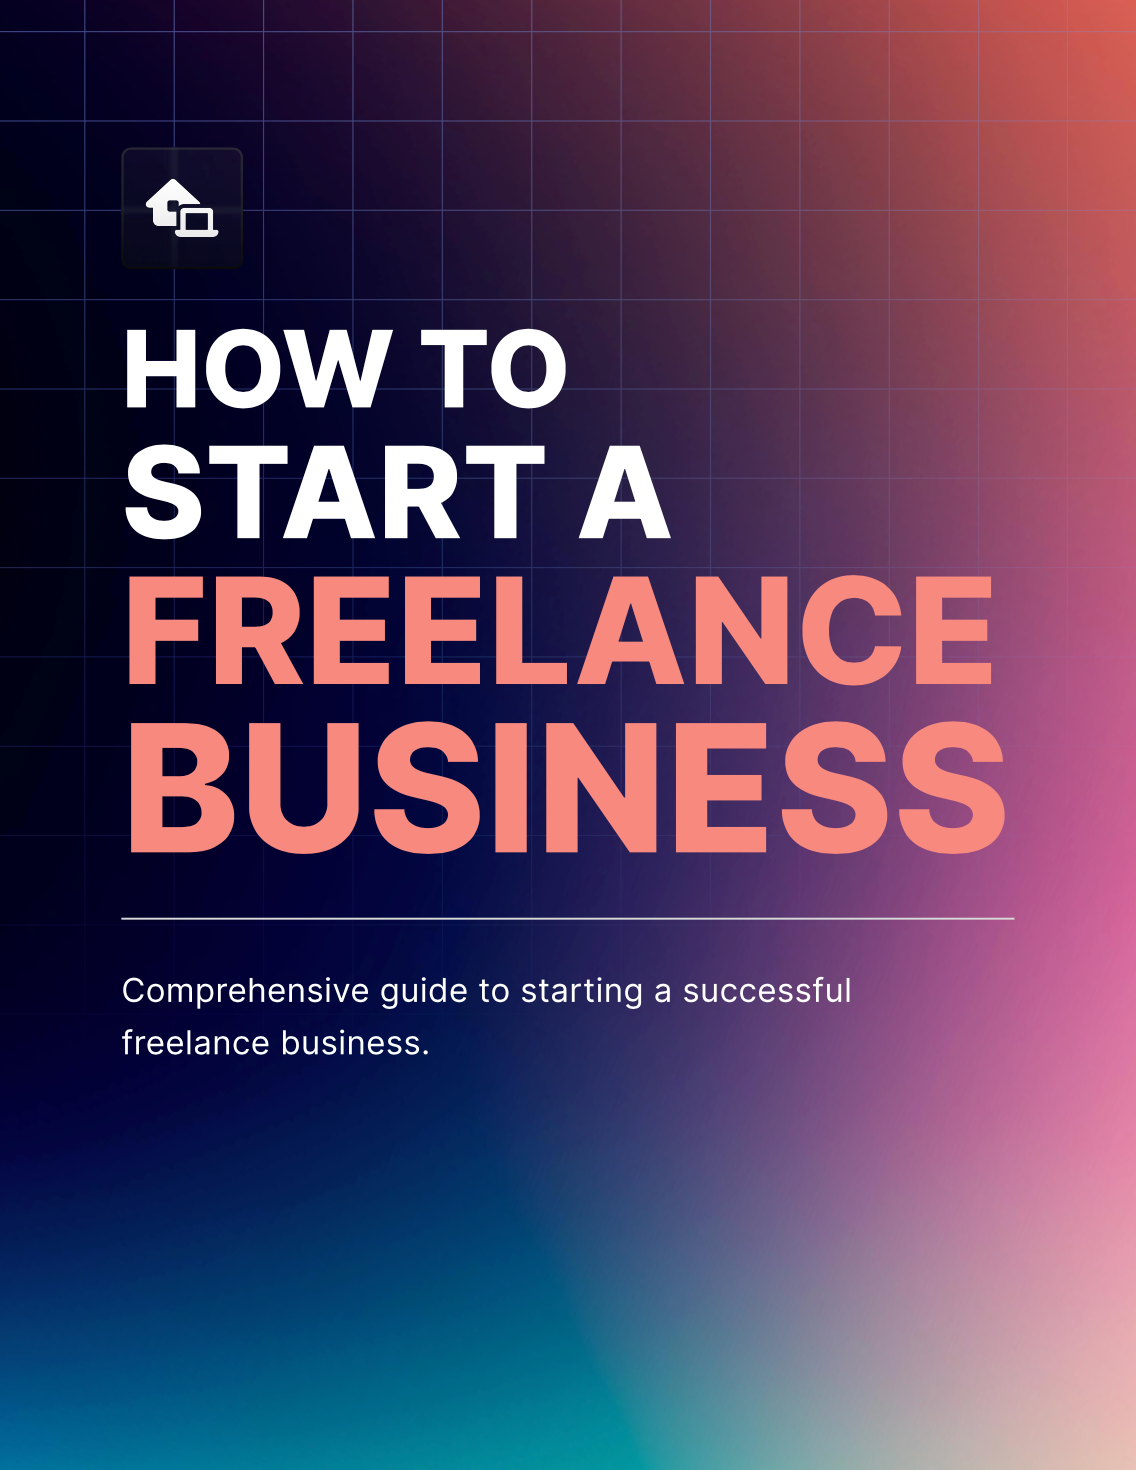 How to Start a Freelance Business - EBook